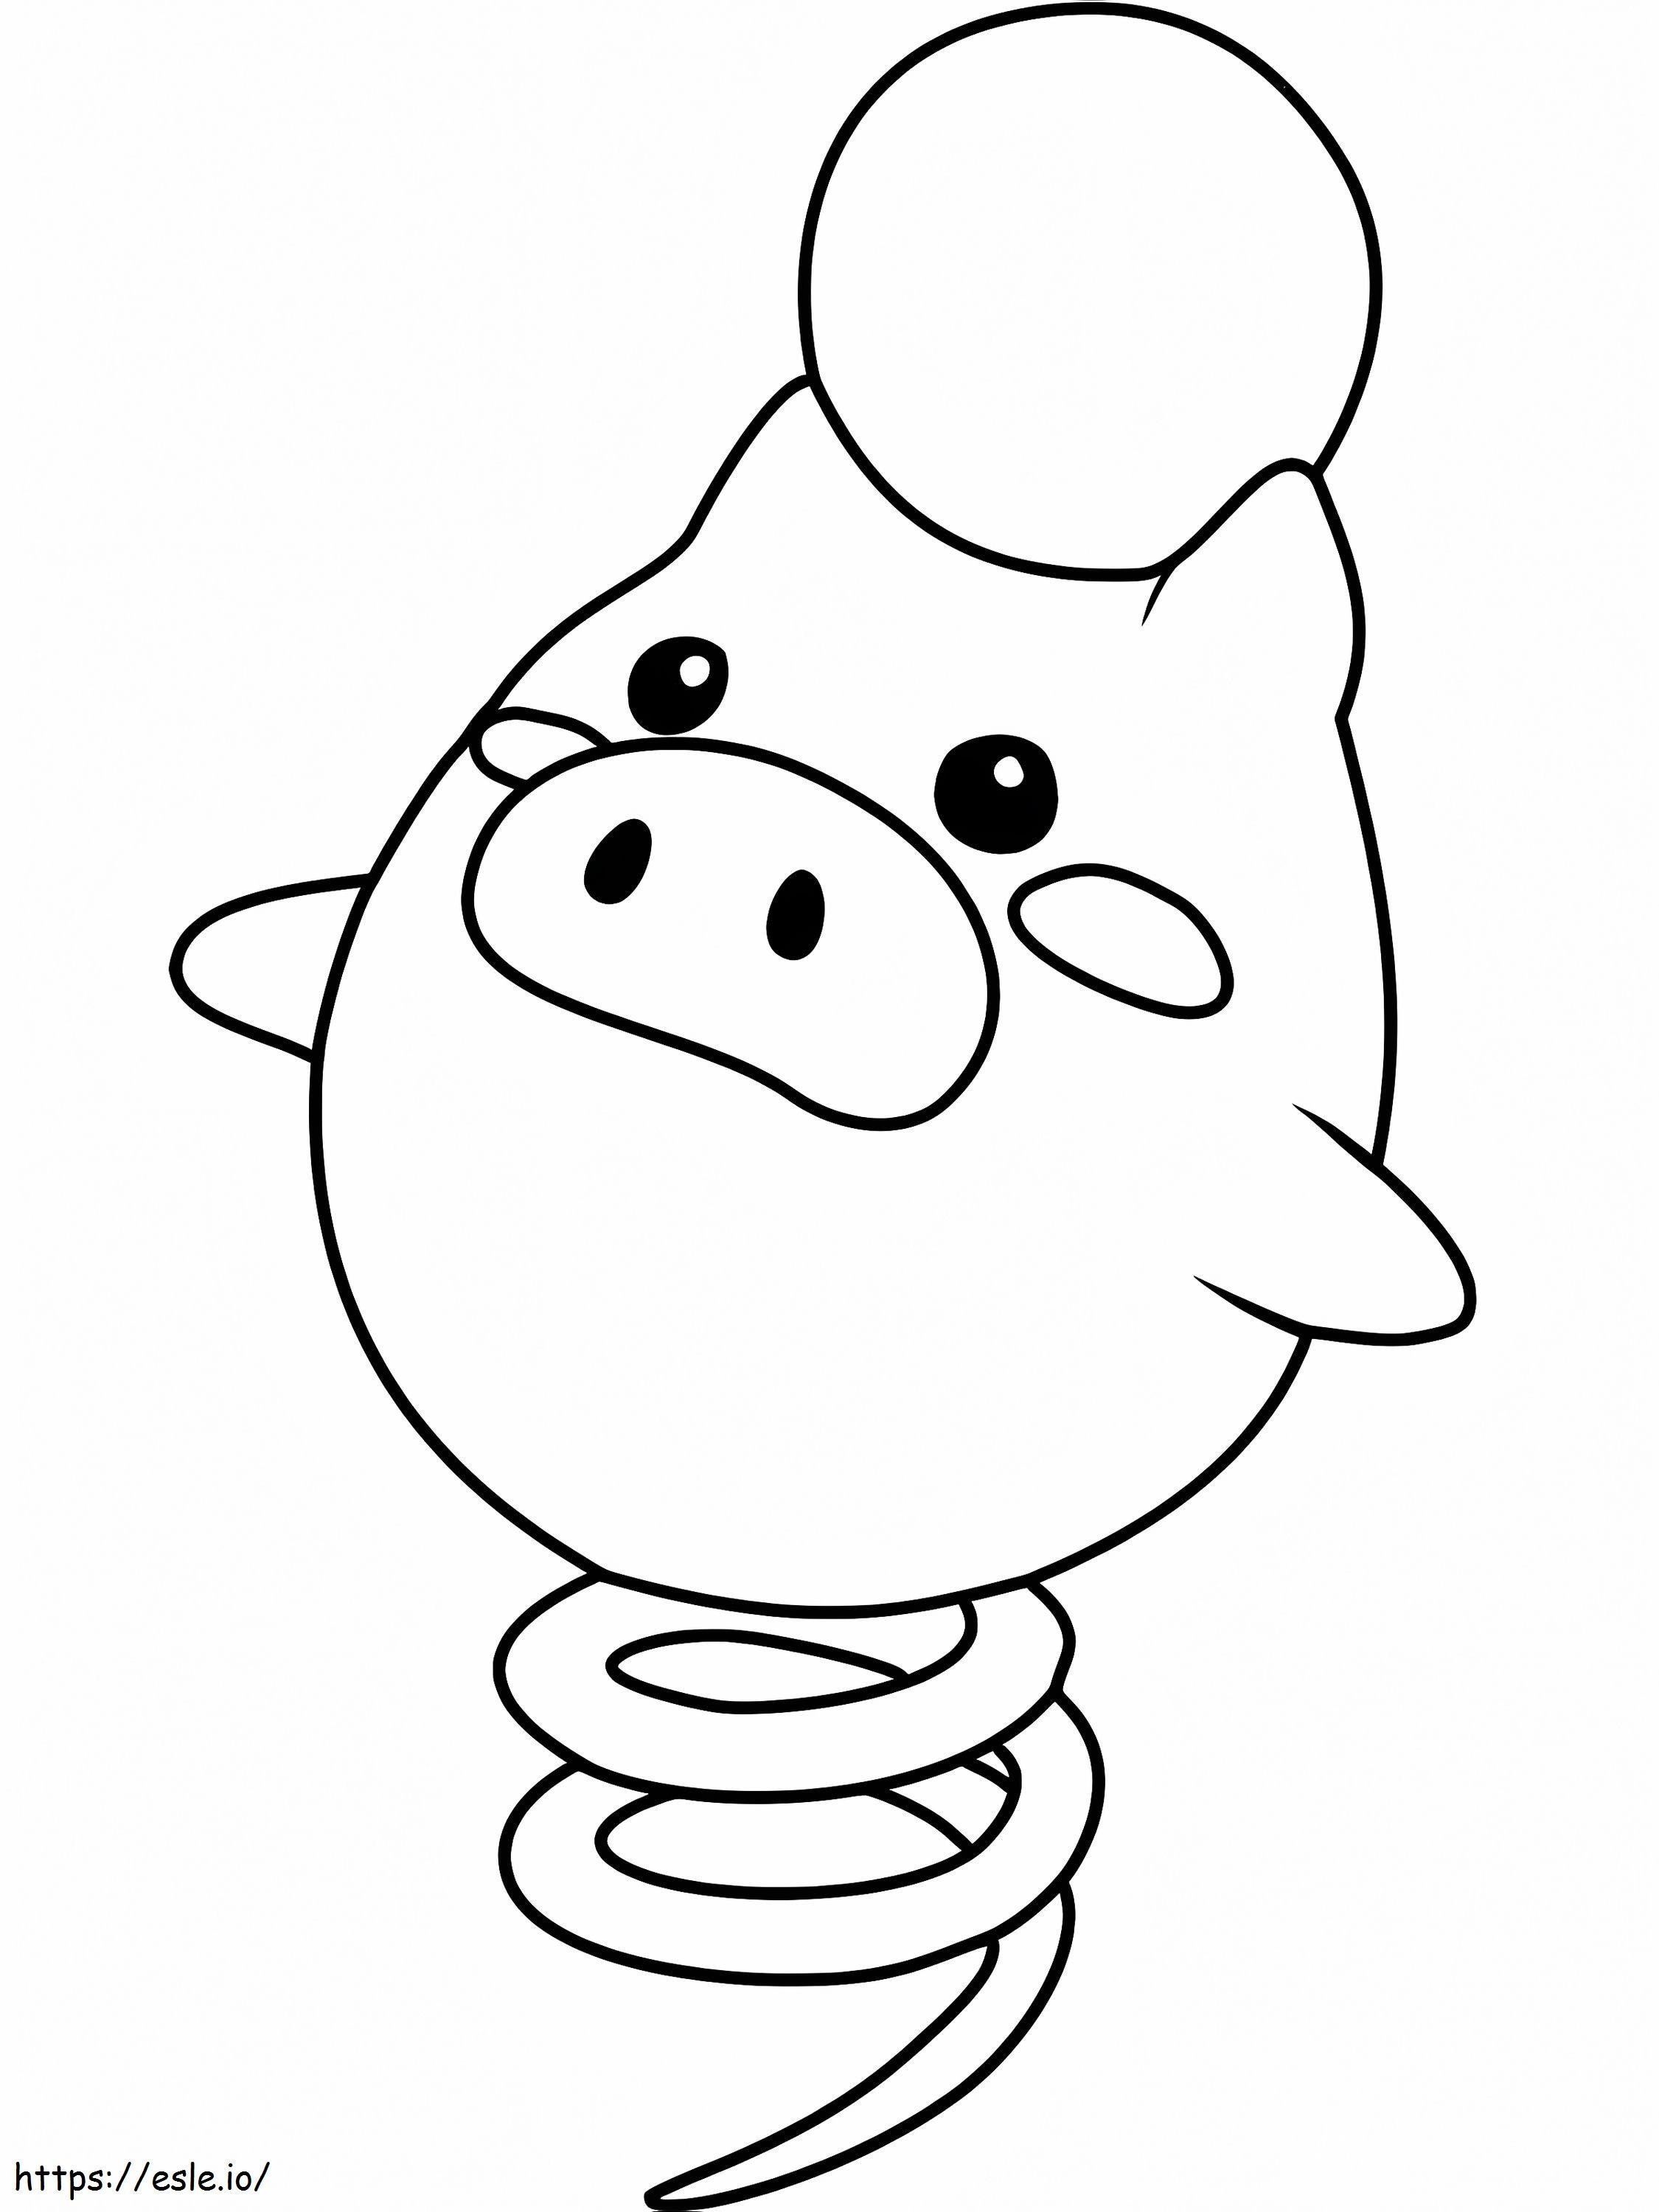 Spoink Pokemon coloring page